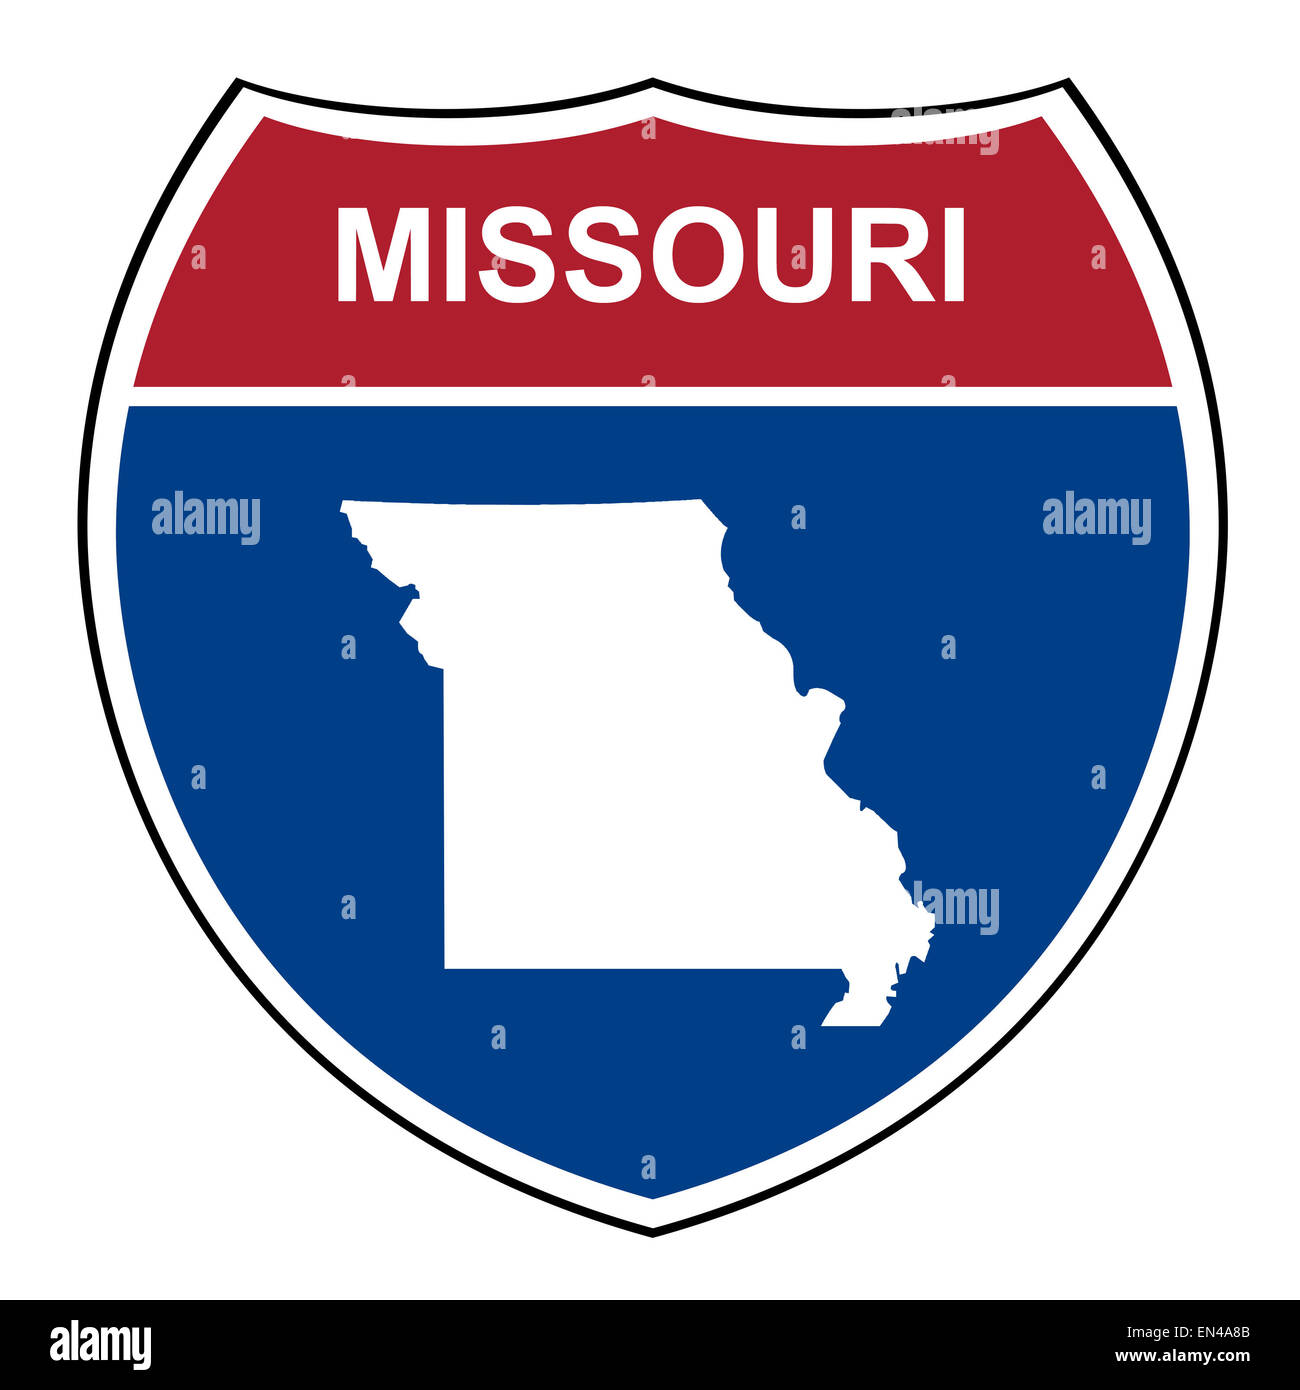 Missouri American interstate highway road shield isolated on a white background. Stock Photo